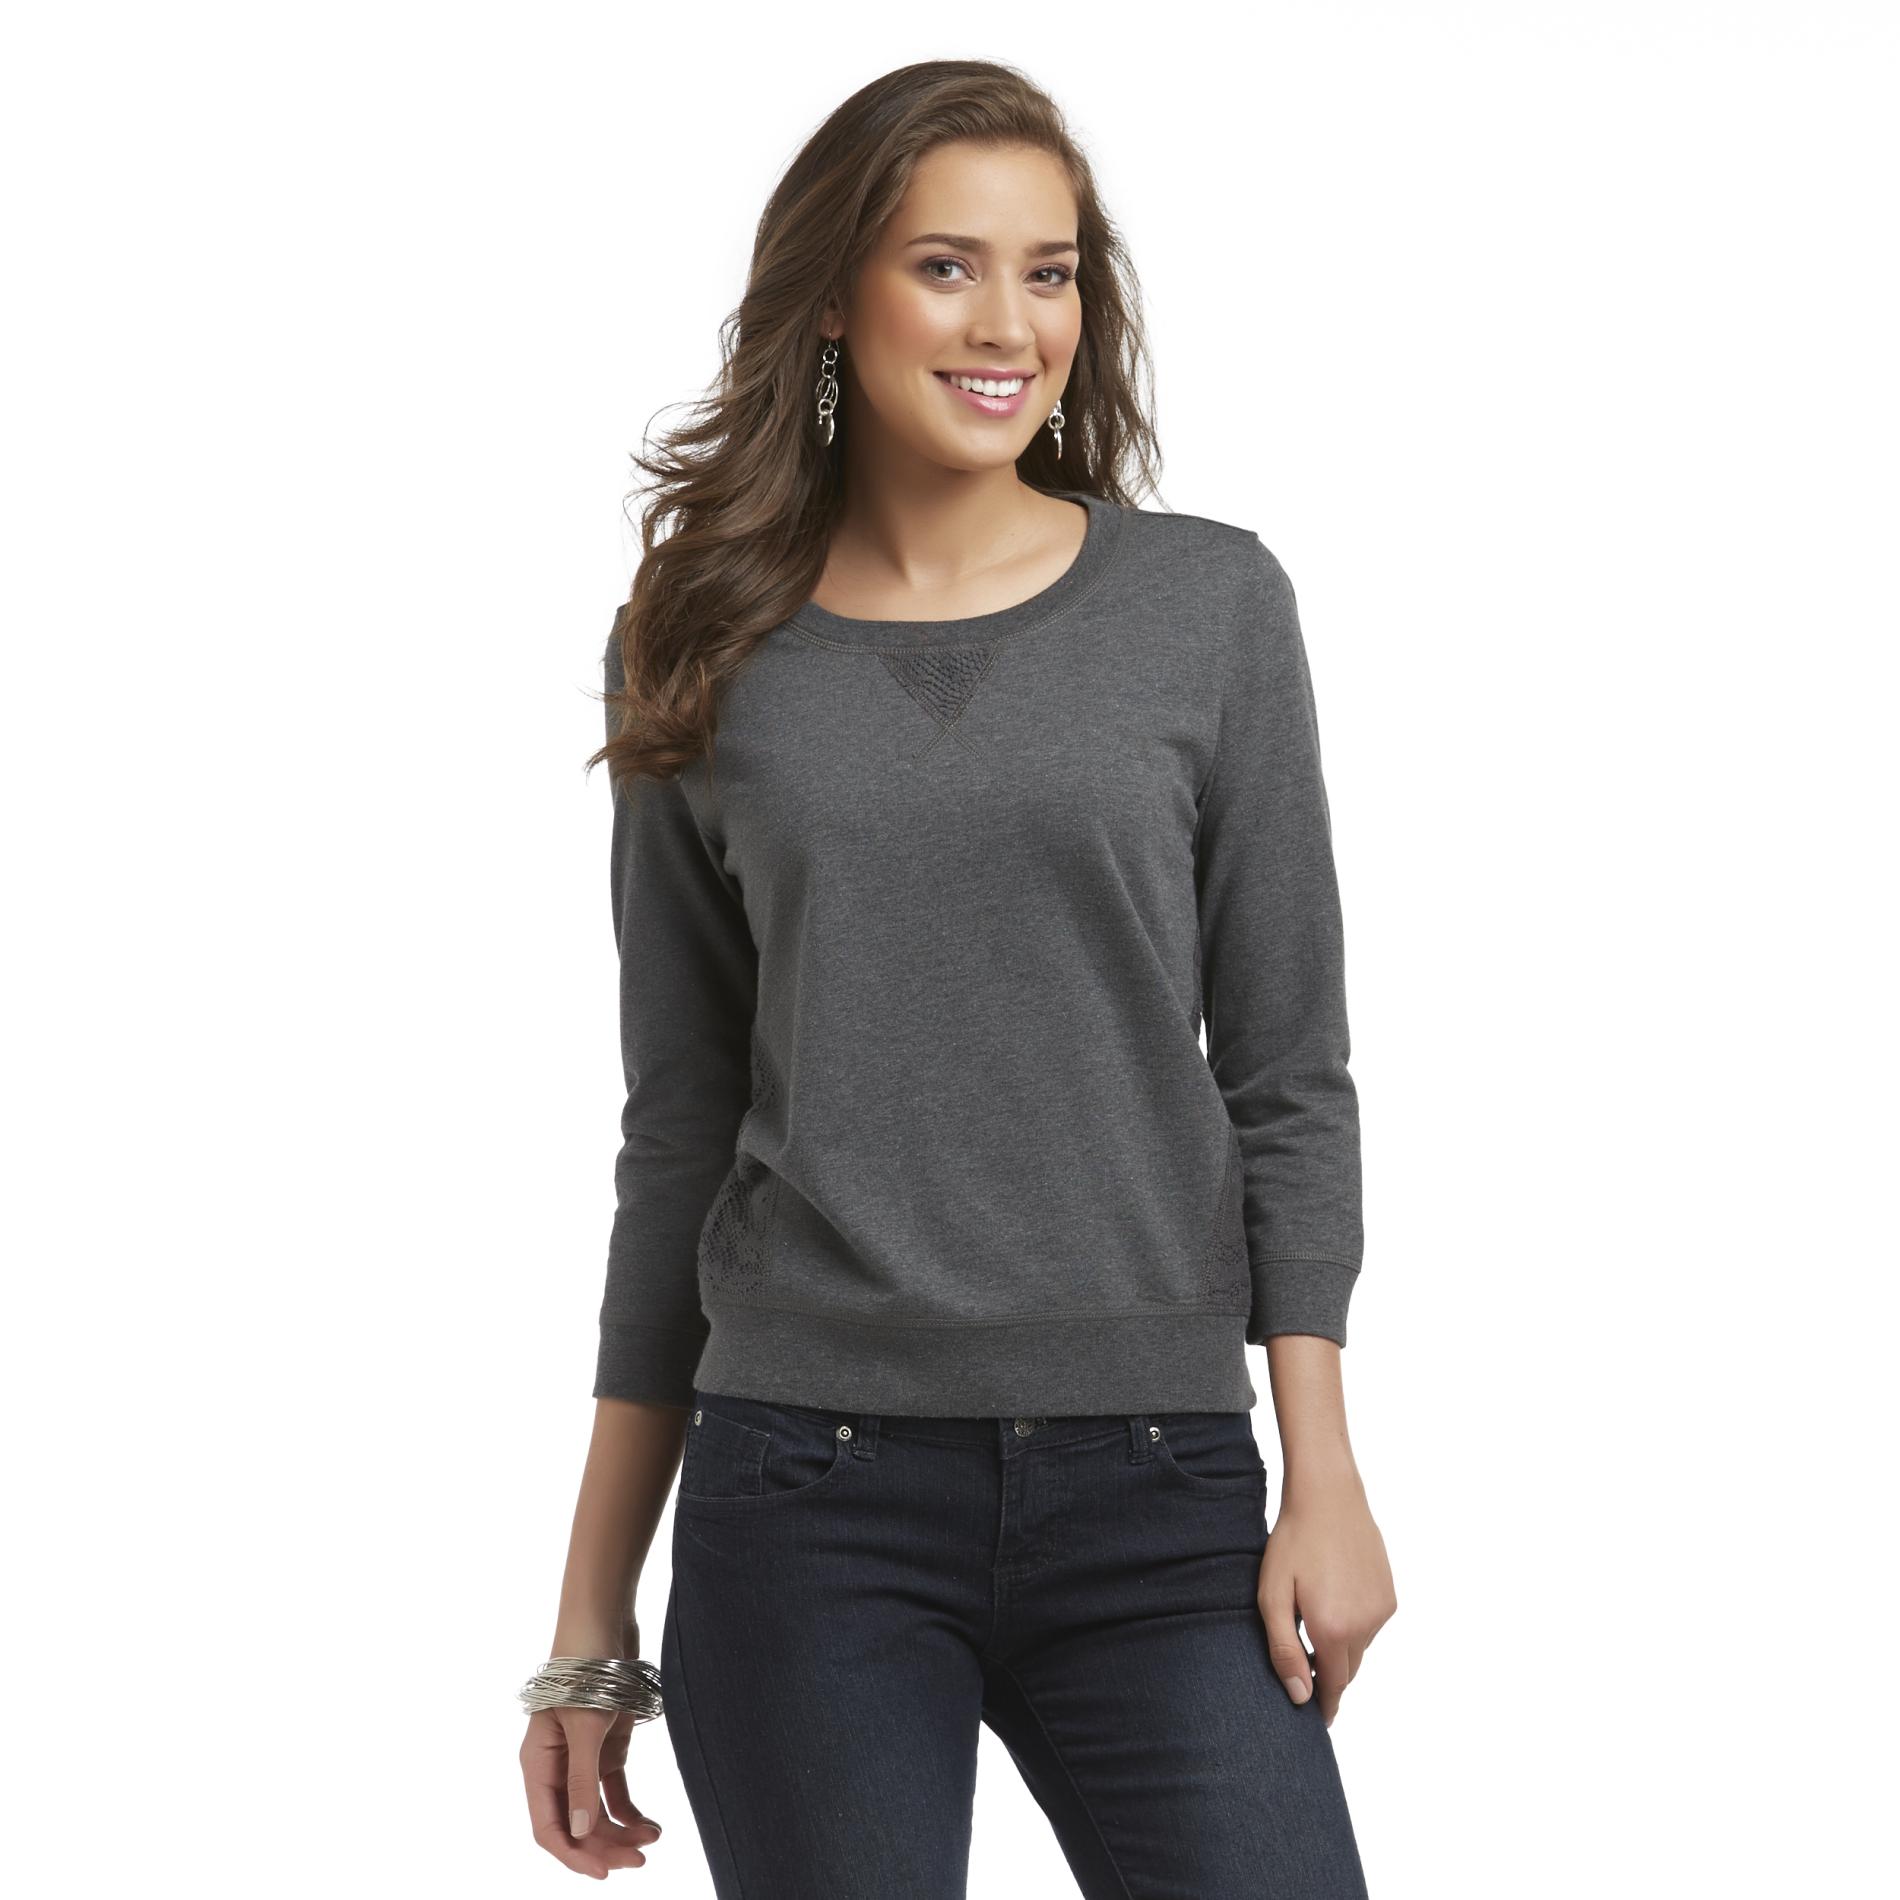 Route 66 Women's French Terry Knit Top - Crochet Accents